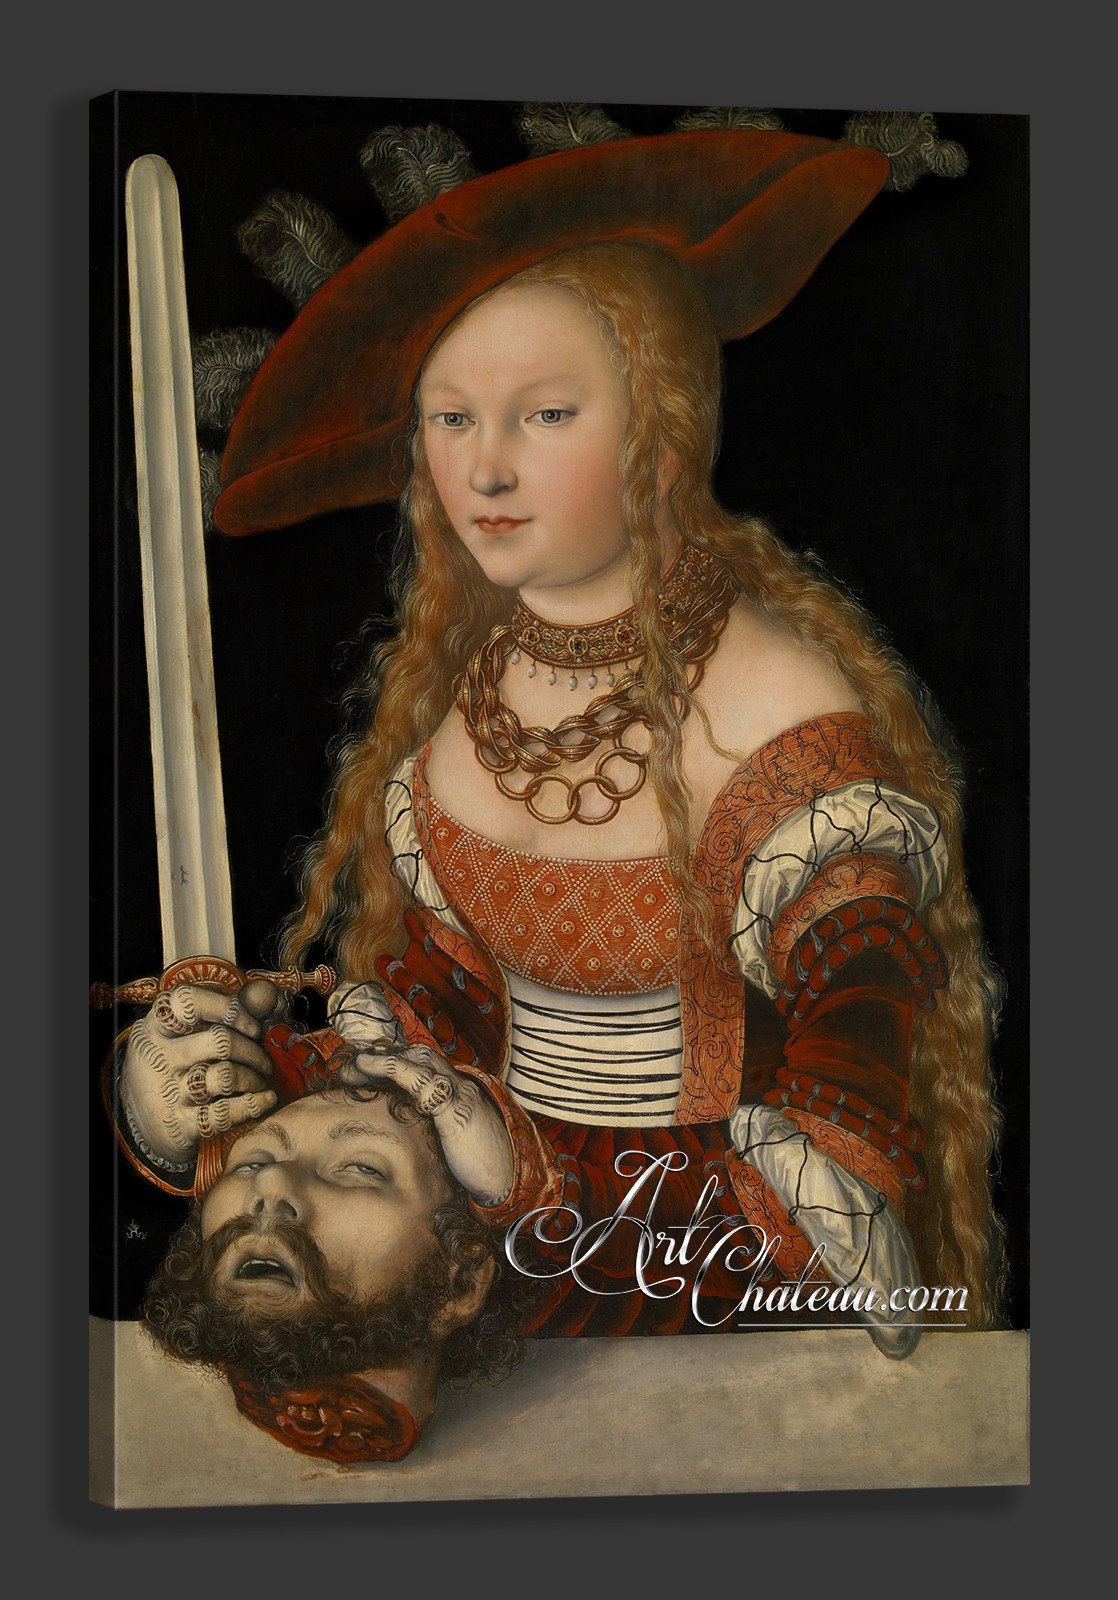 Judith with the Head of Holofernes, after Lucas Cranach